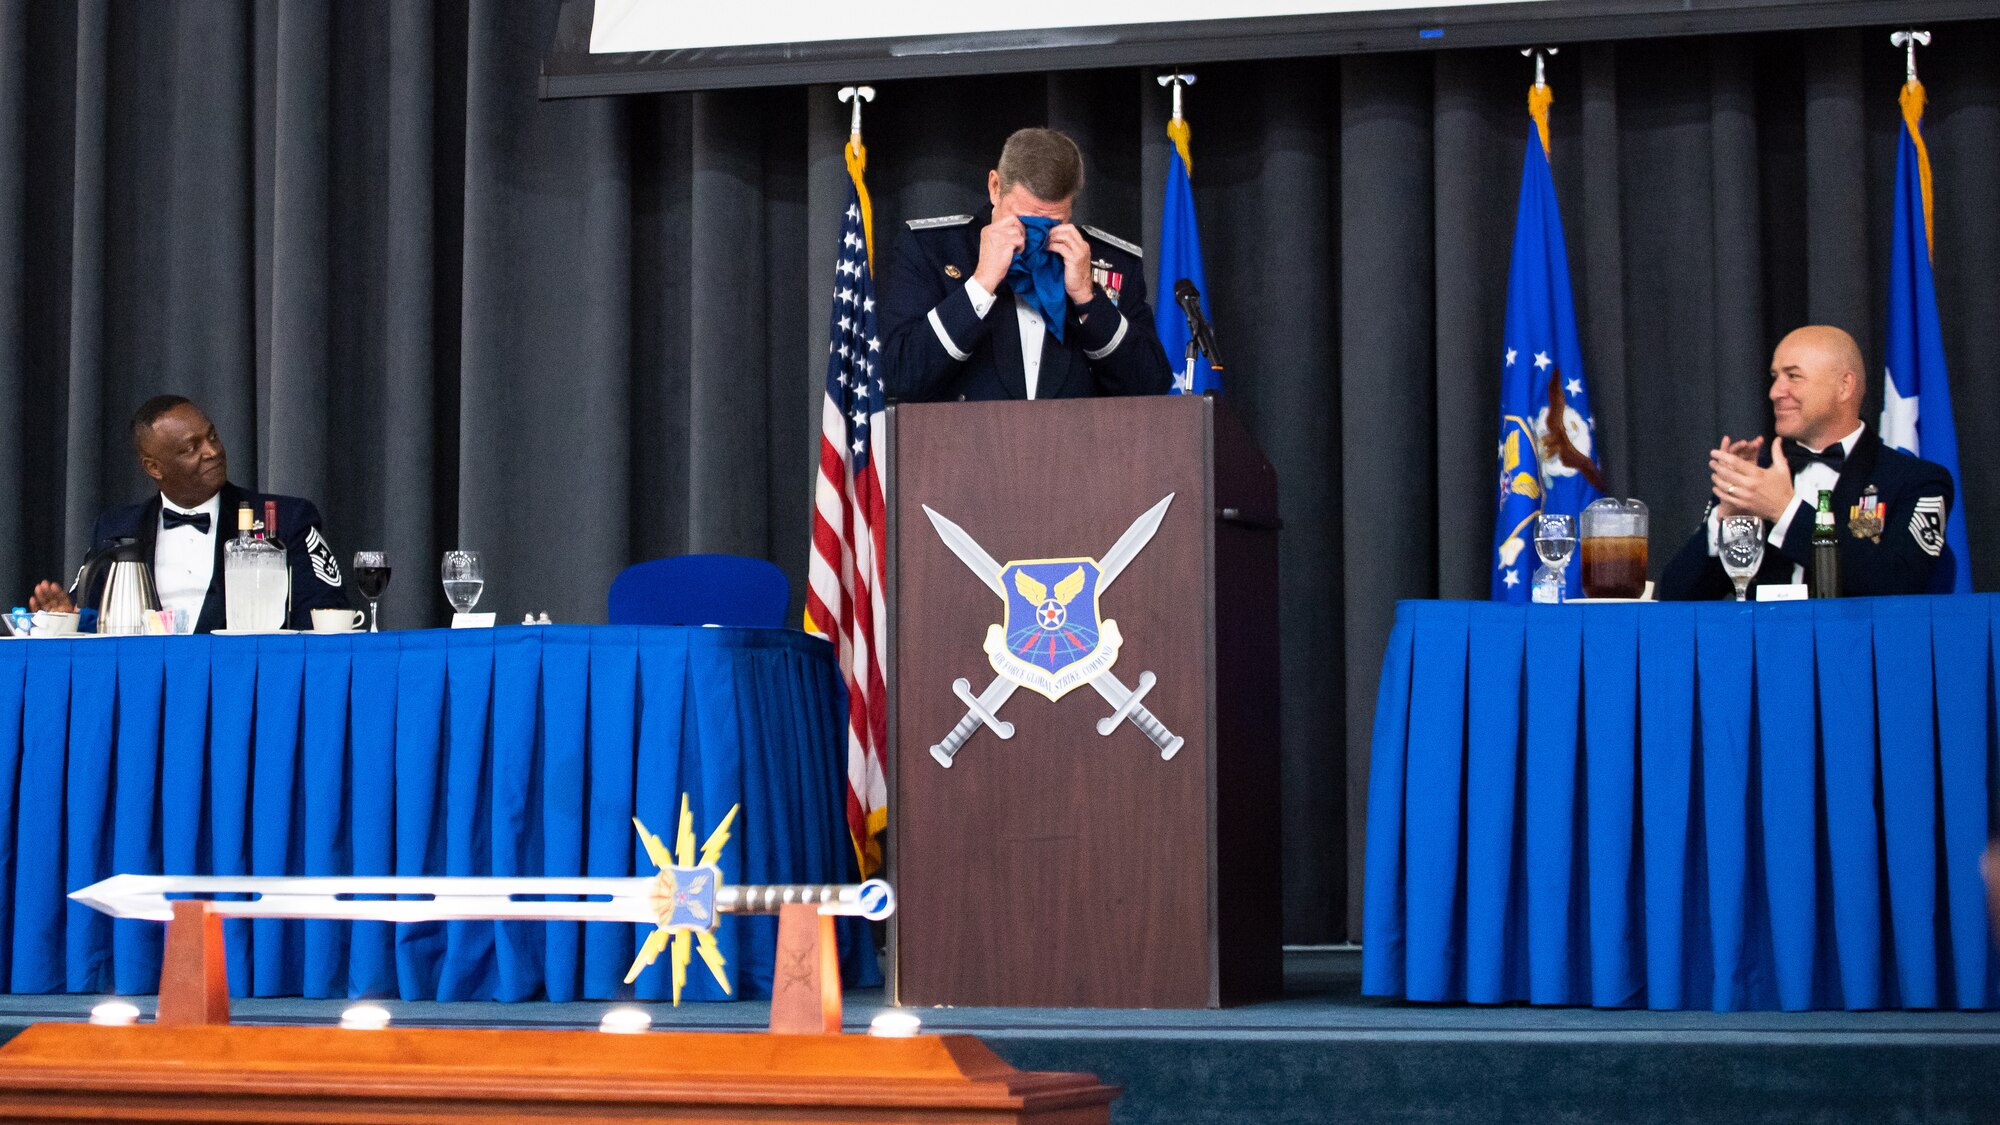 Retired Gen. Robin Rand, former Air Force Global Strike Command commander, wipes tears from his eyes after being honored at an Order of the Sword ceremony at Barksdale Air Force Base, Louisiana, April 23, 2021. The Order of the Sword is an Air Force tradition in which members of the enlisted corps recognize and honor senior officers and civilians who have made significant contributions to the welfare and prestige of the enlisted corps. (U.S. Air Force photo by Airman 1st Class Jacob B. Wrightsman)